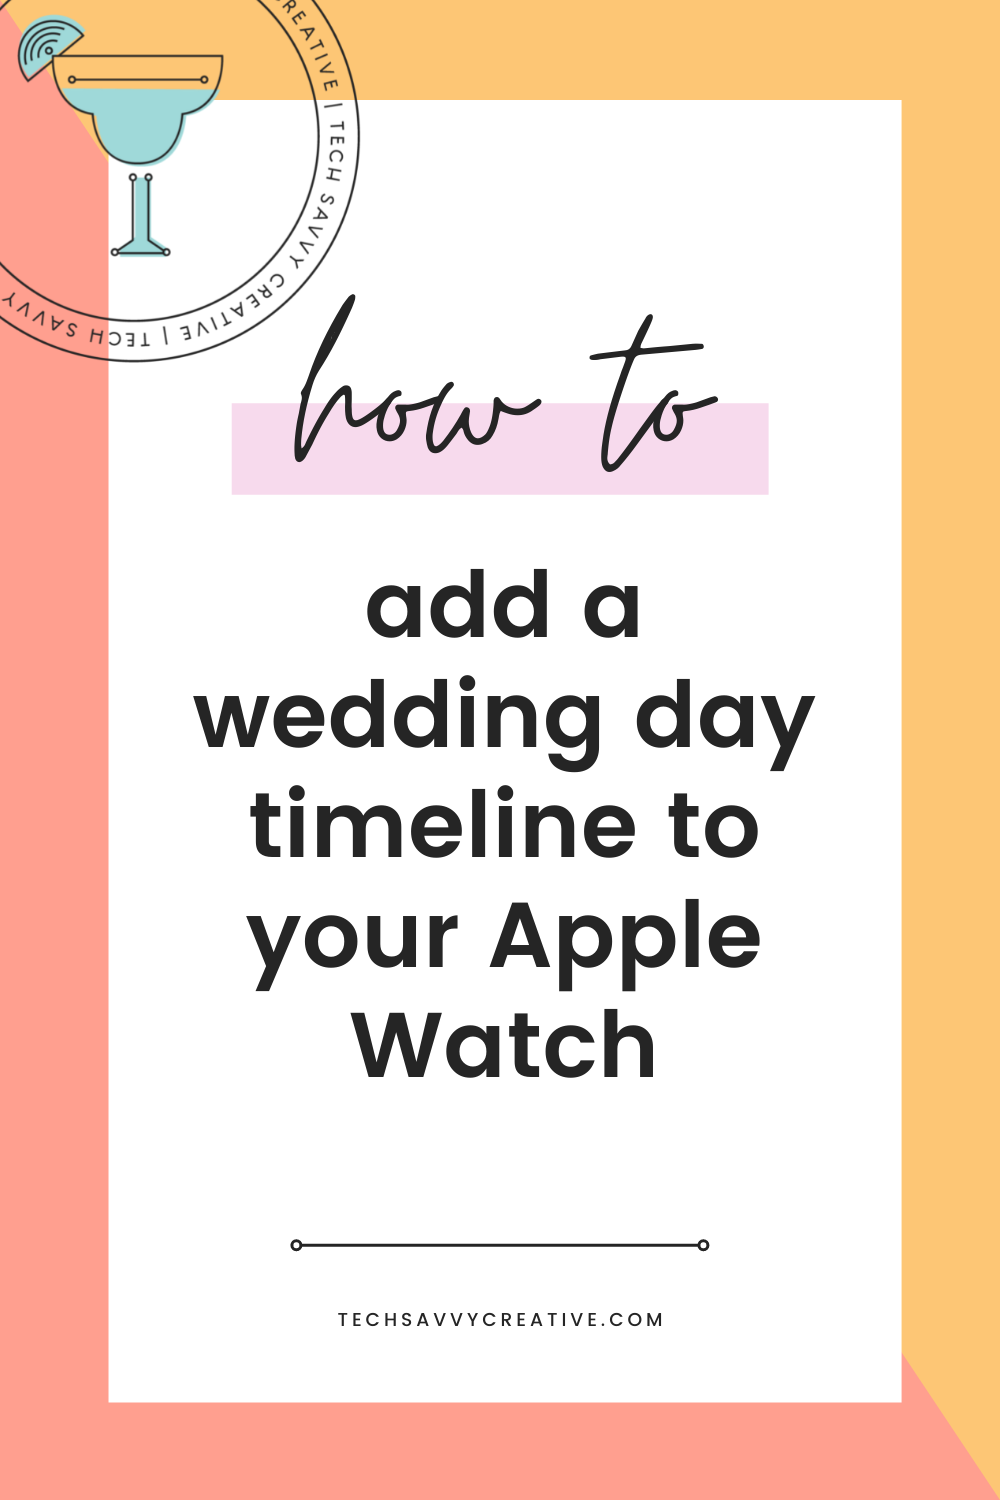 Tech Savvy Creative - How to add Wedding Day Timeline to Apple Watch